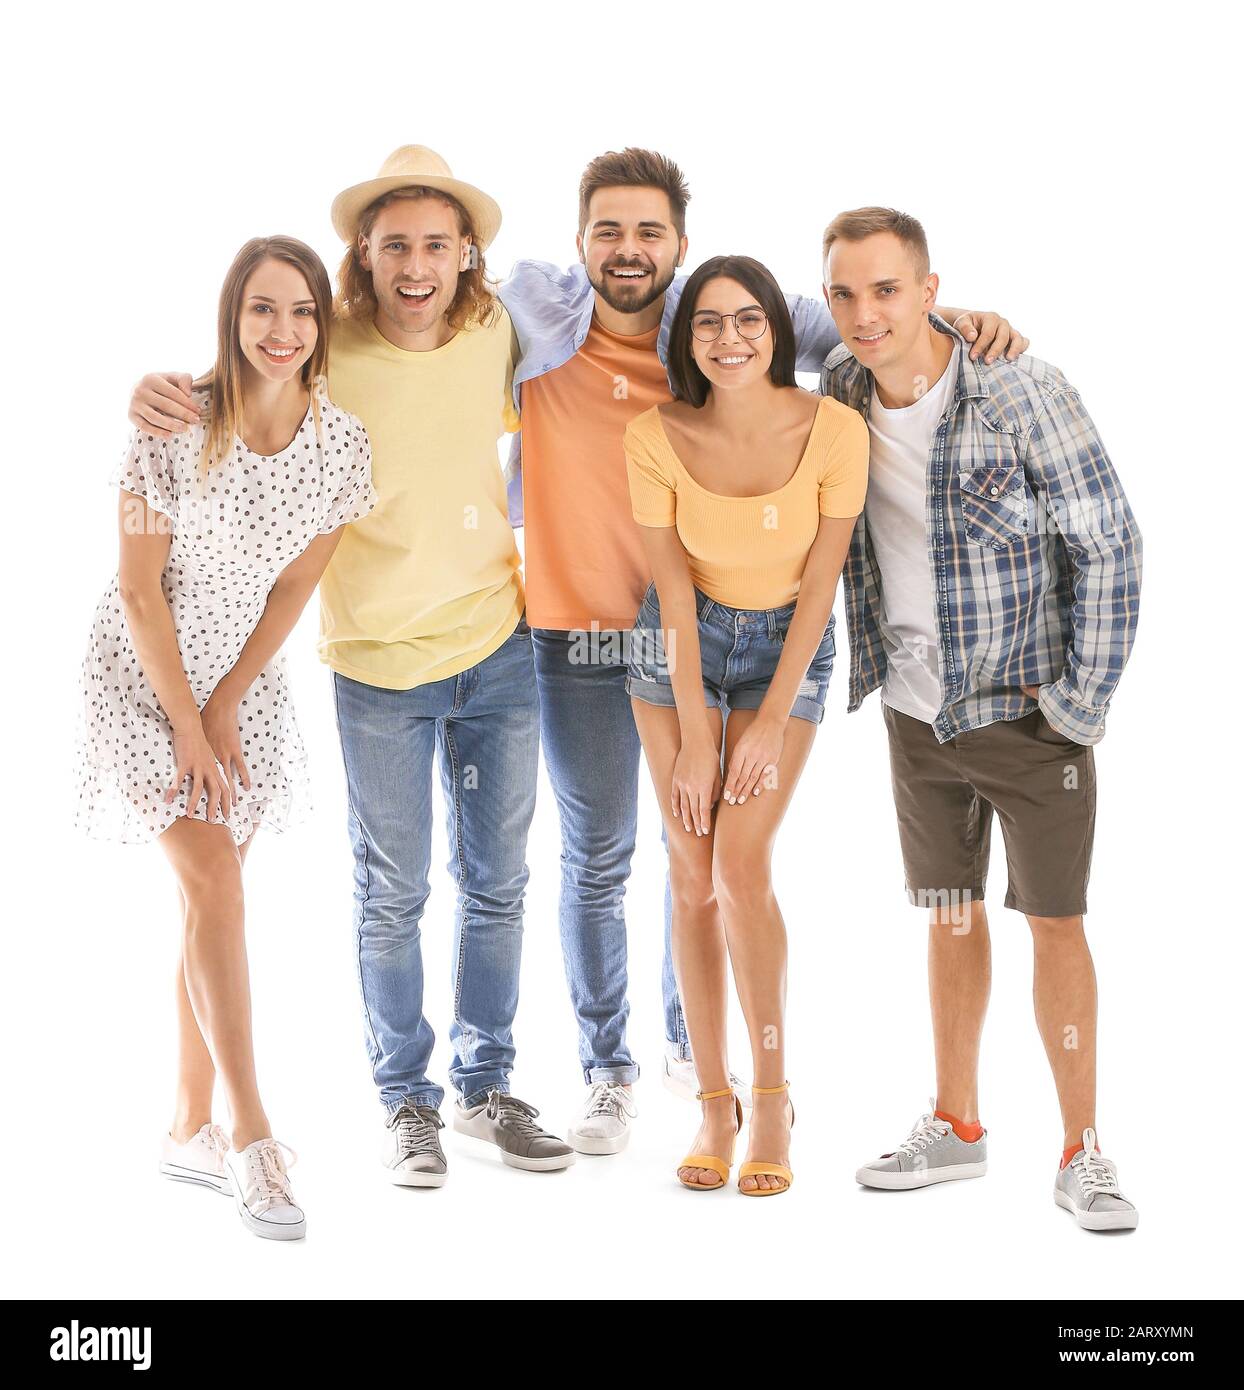 Group hug friends Cut Out Stock Images & Pictures - Alamy